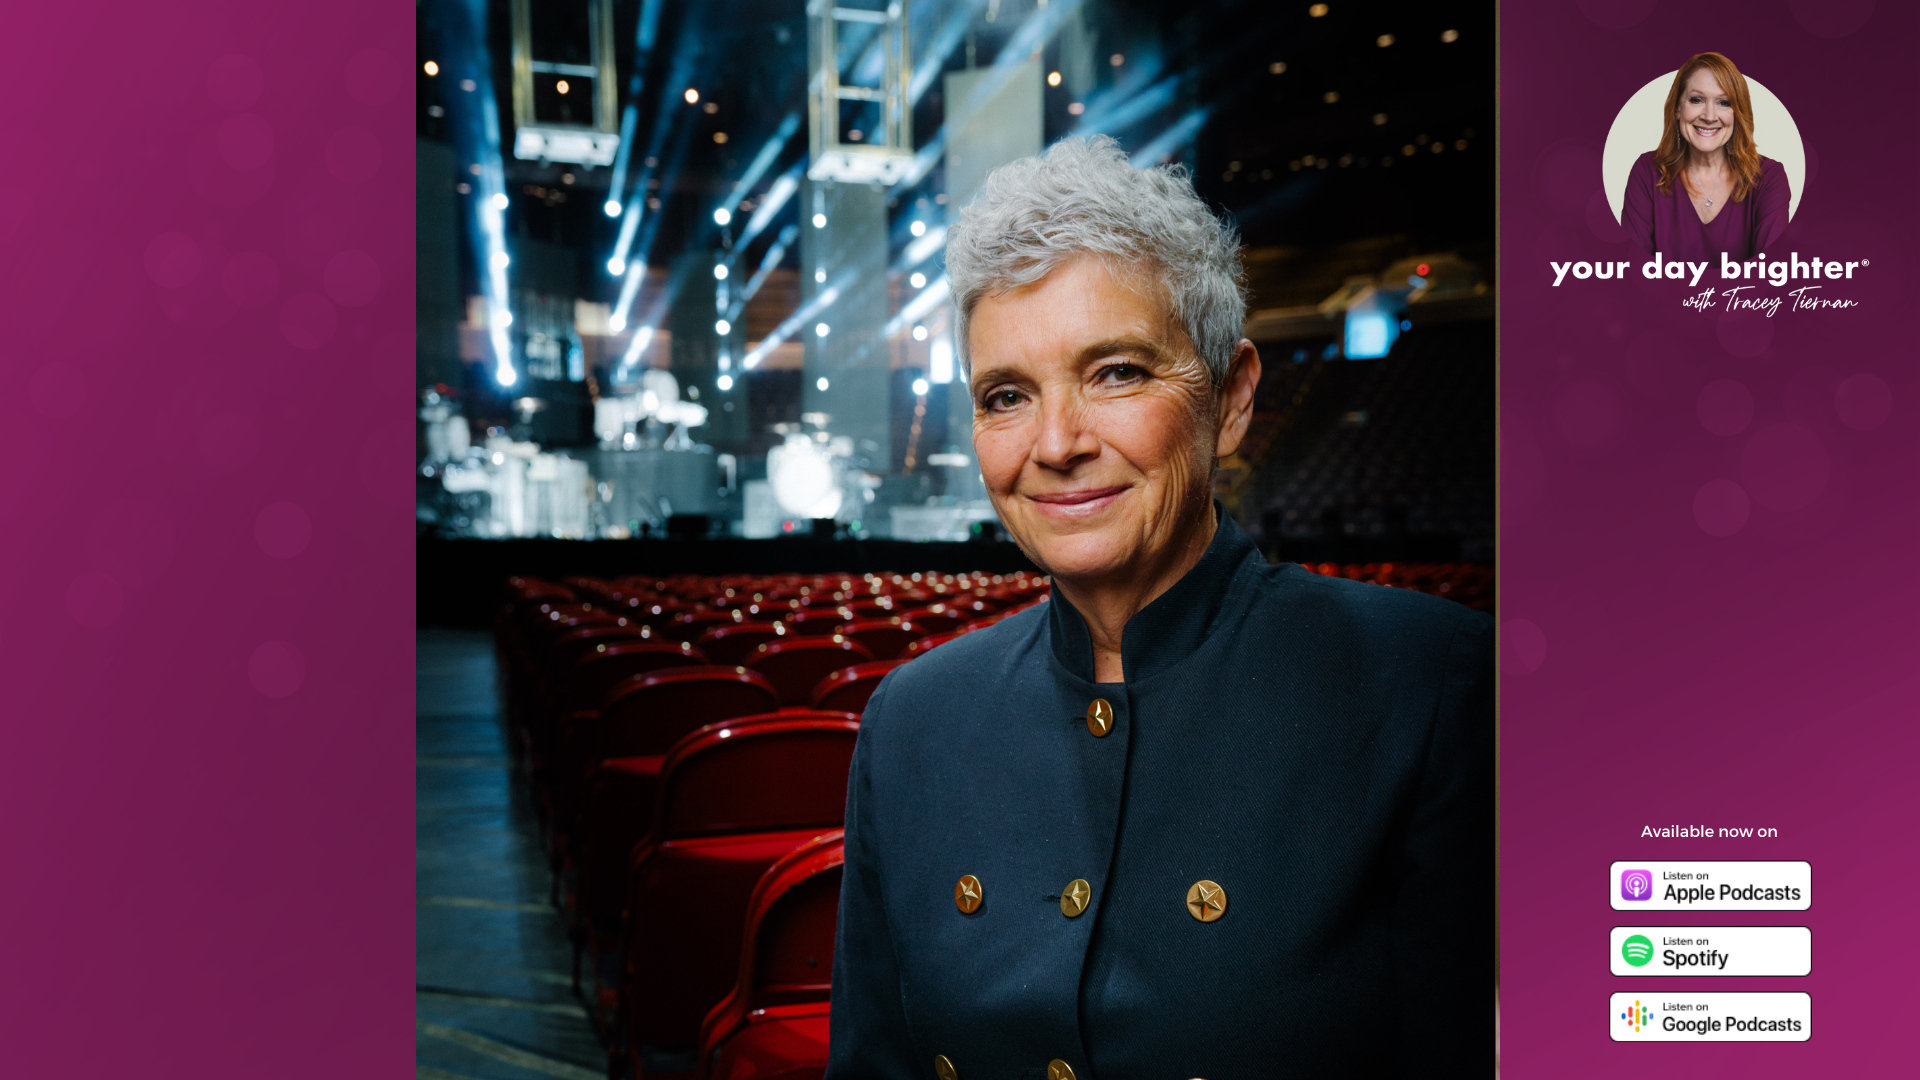 Helen Smallbone sitting in a red seat with rows and rows of red seats behind her in front of a lit up concert stage